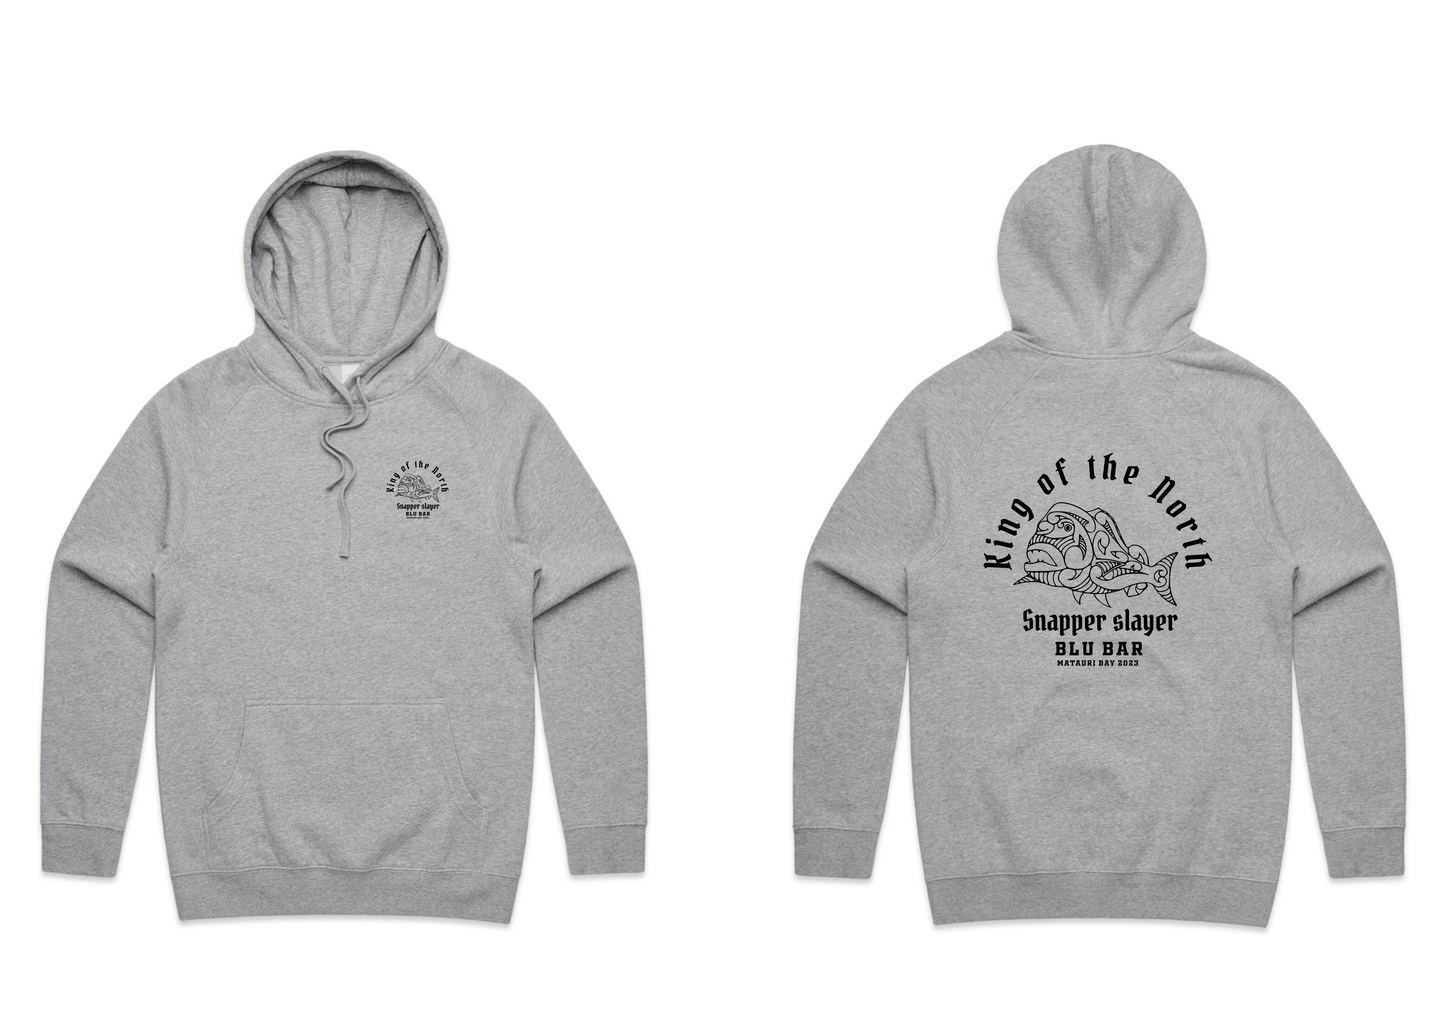 King of the North - Snapper Slayer Hoodies